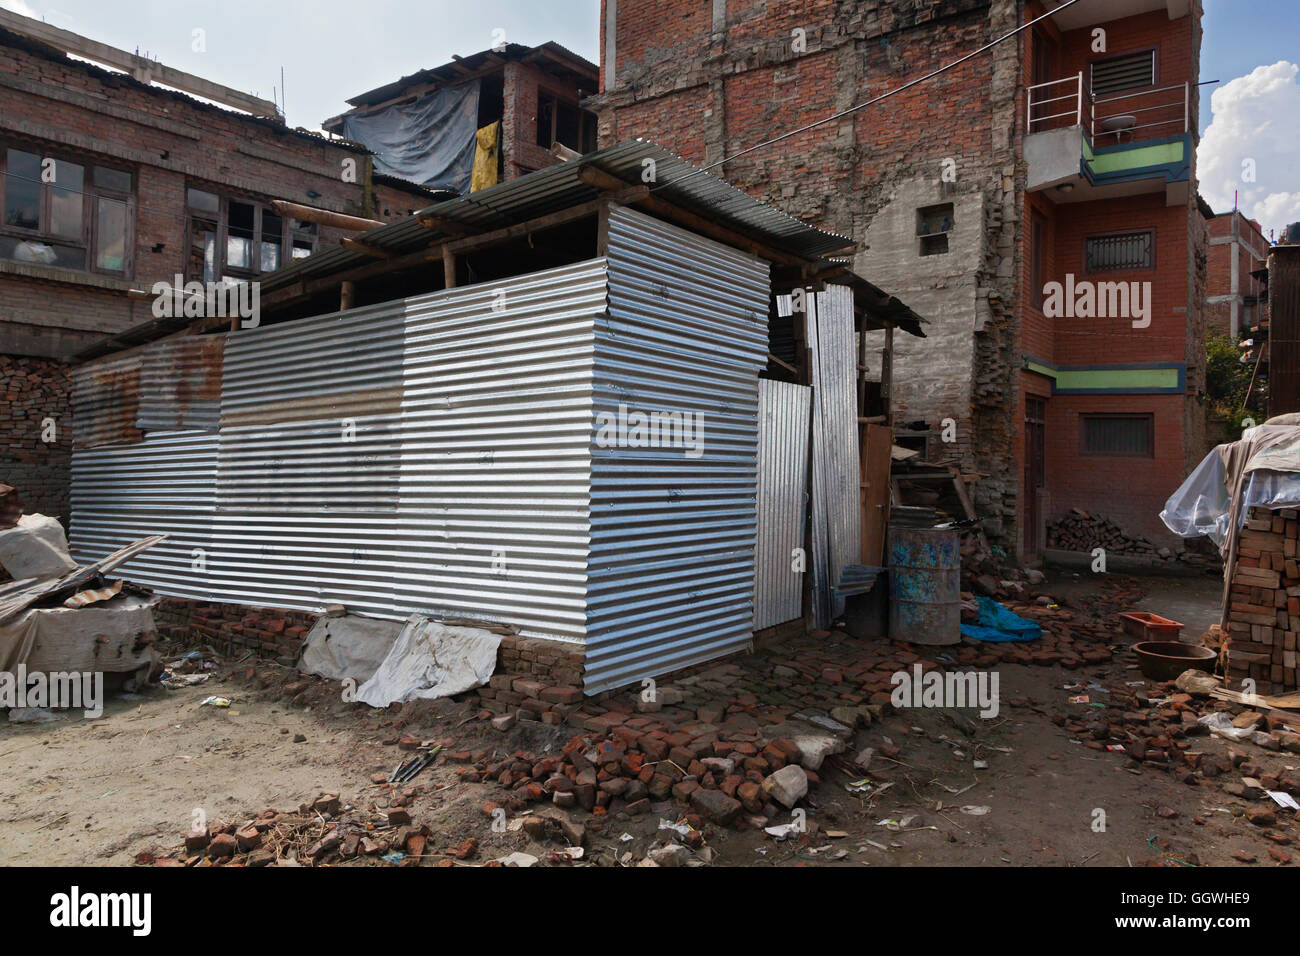 Tin shelters provide temporary shelter in the traditional town of BHAKTAPUR was severely damaged by the 2015 earthquake - NEPAL Stock Photo